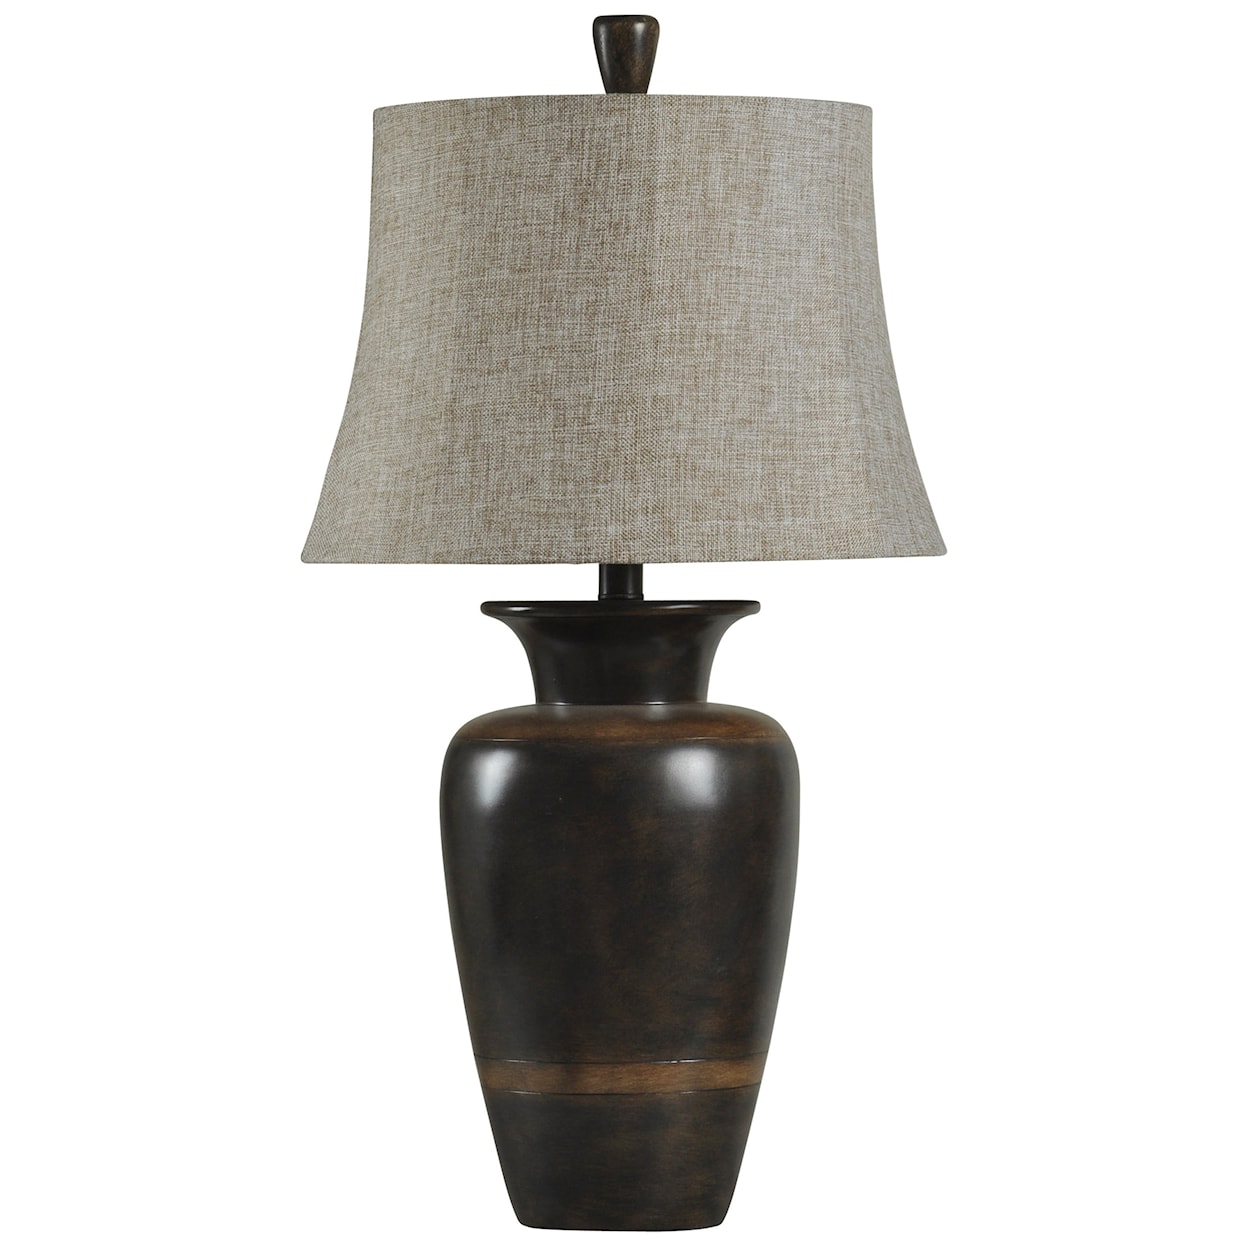 StyleCraft Lamps Classic Urn Design Table Lamp